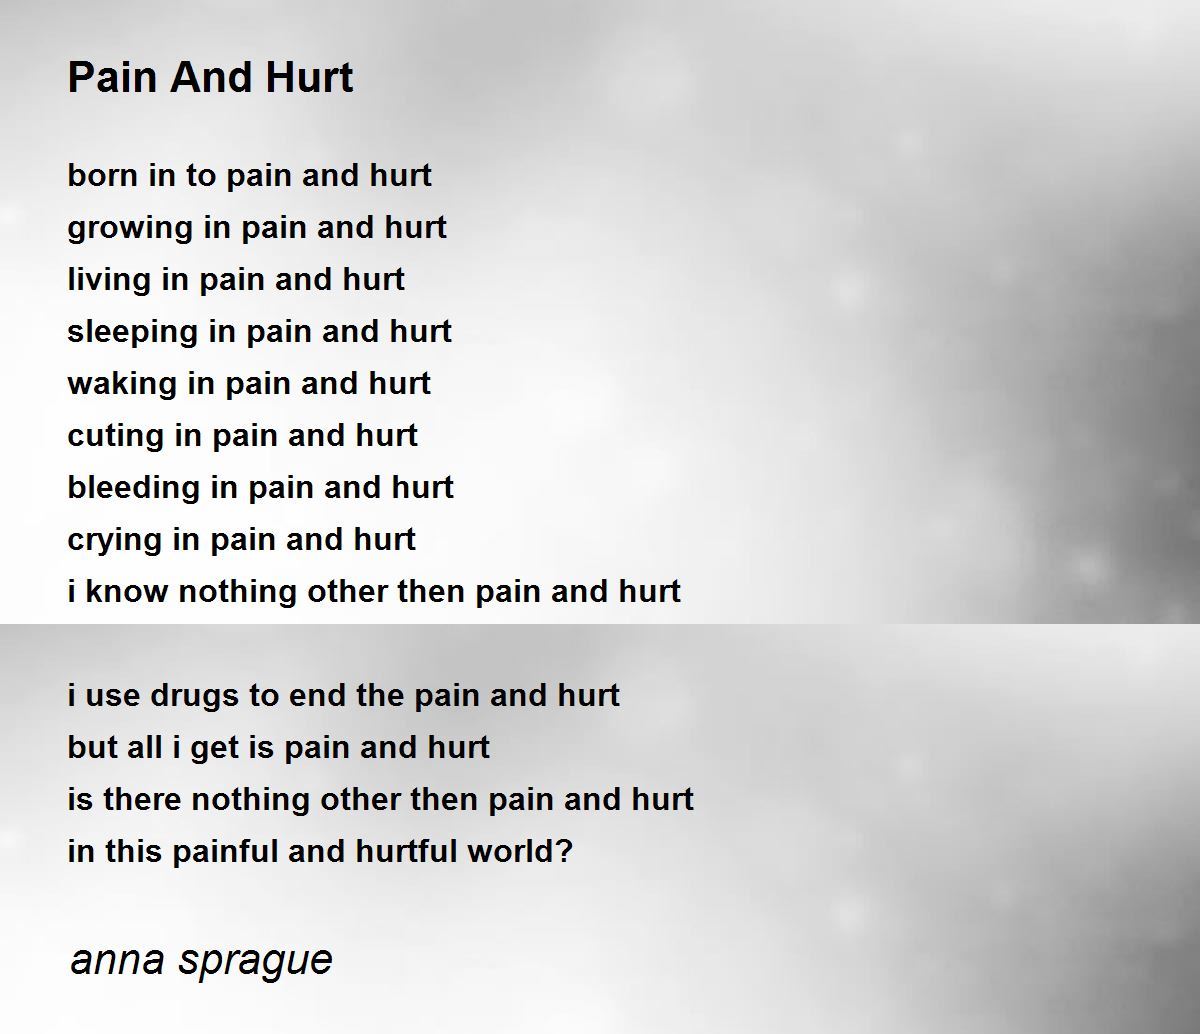 Pain And Hurt Poem by anna sprague - Poem Hunter Comments